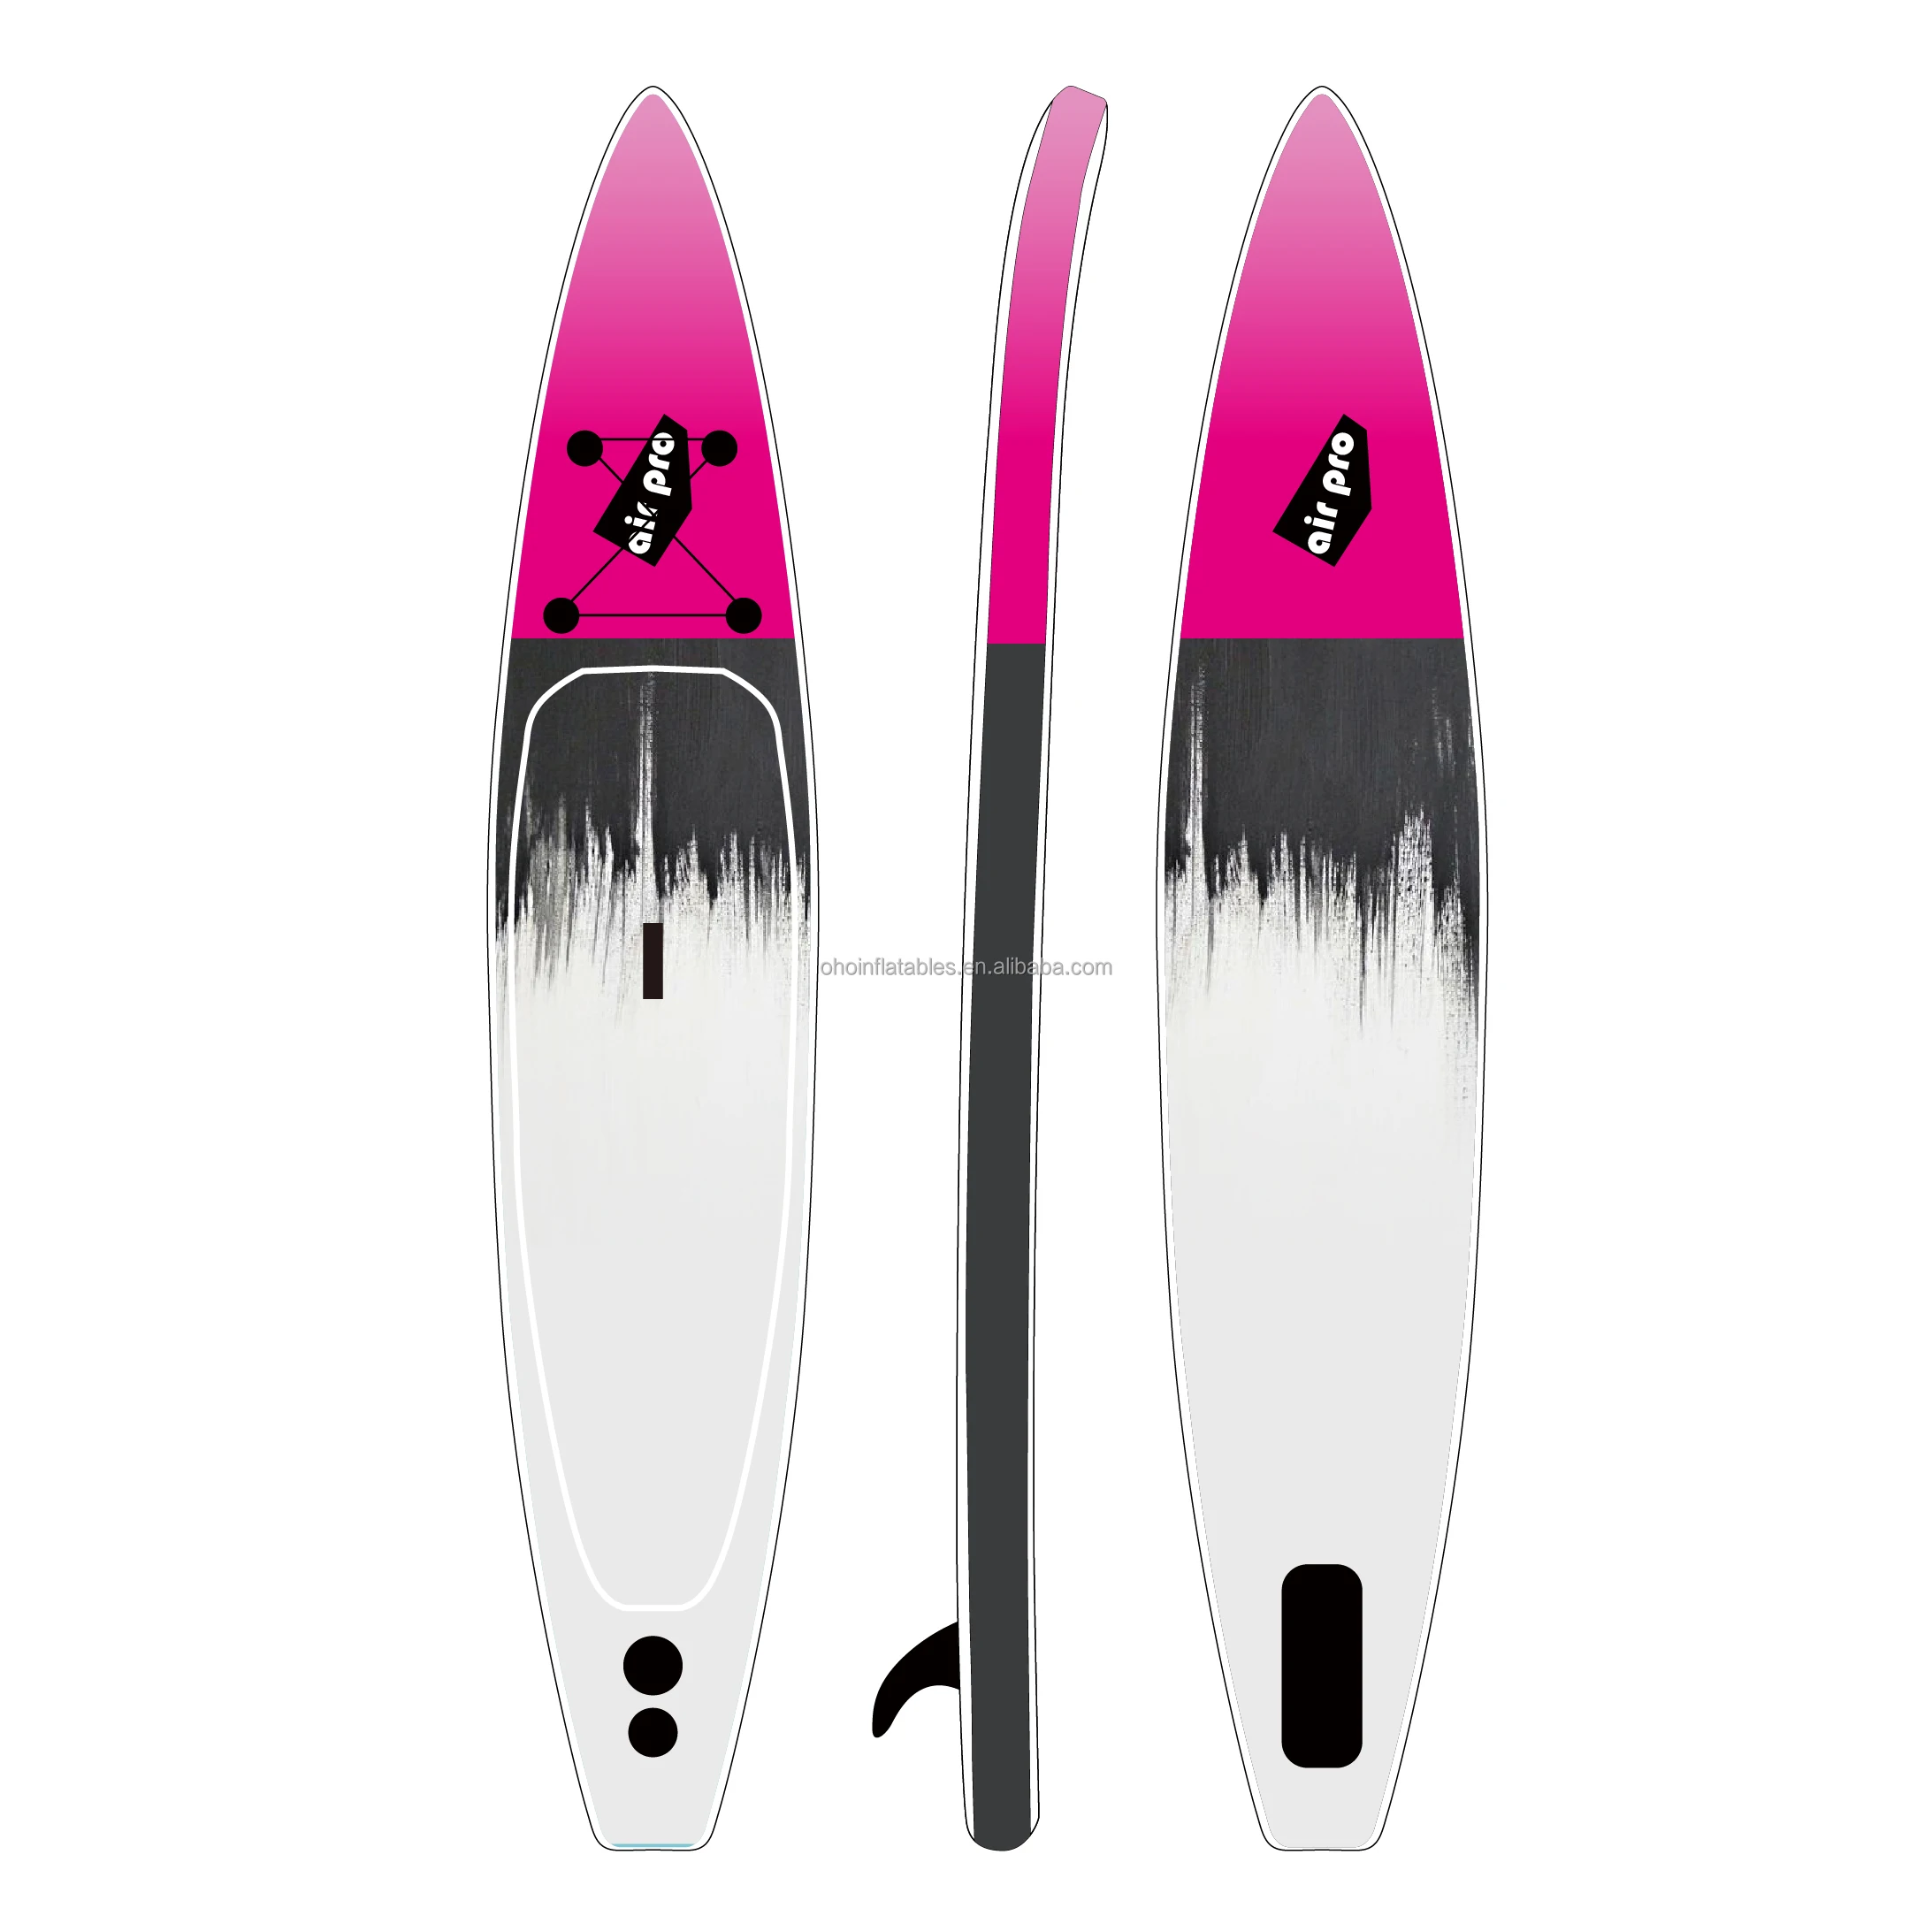 Factory Price Race Soft Top Air Inflate Surf Sup Board Blow Up Pink Inflatable Surfboard With Accessories Water Sports Longboard